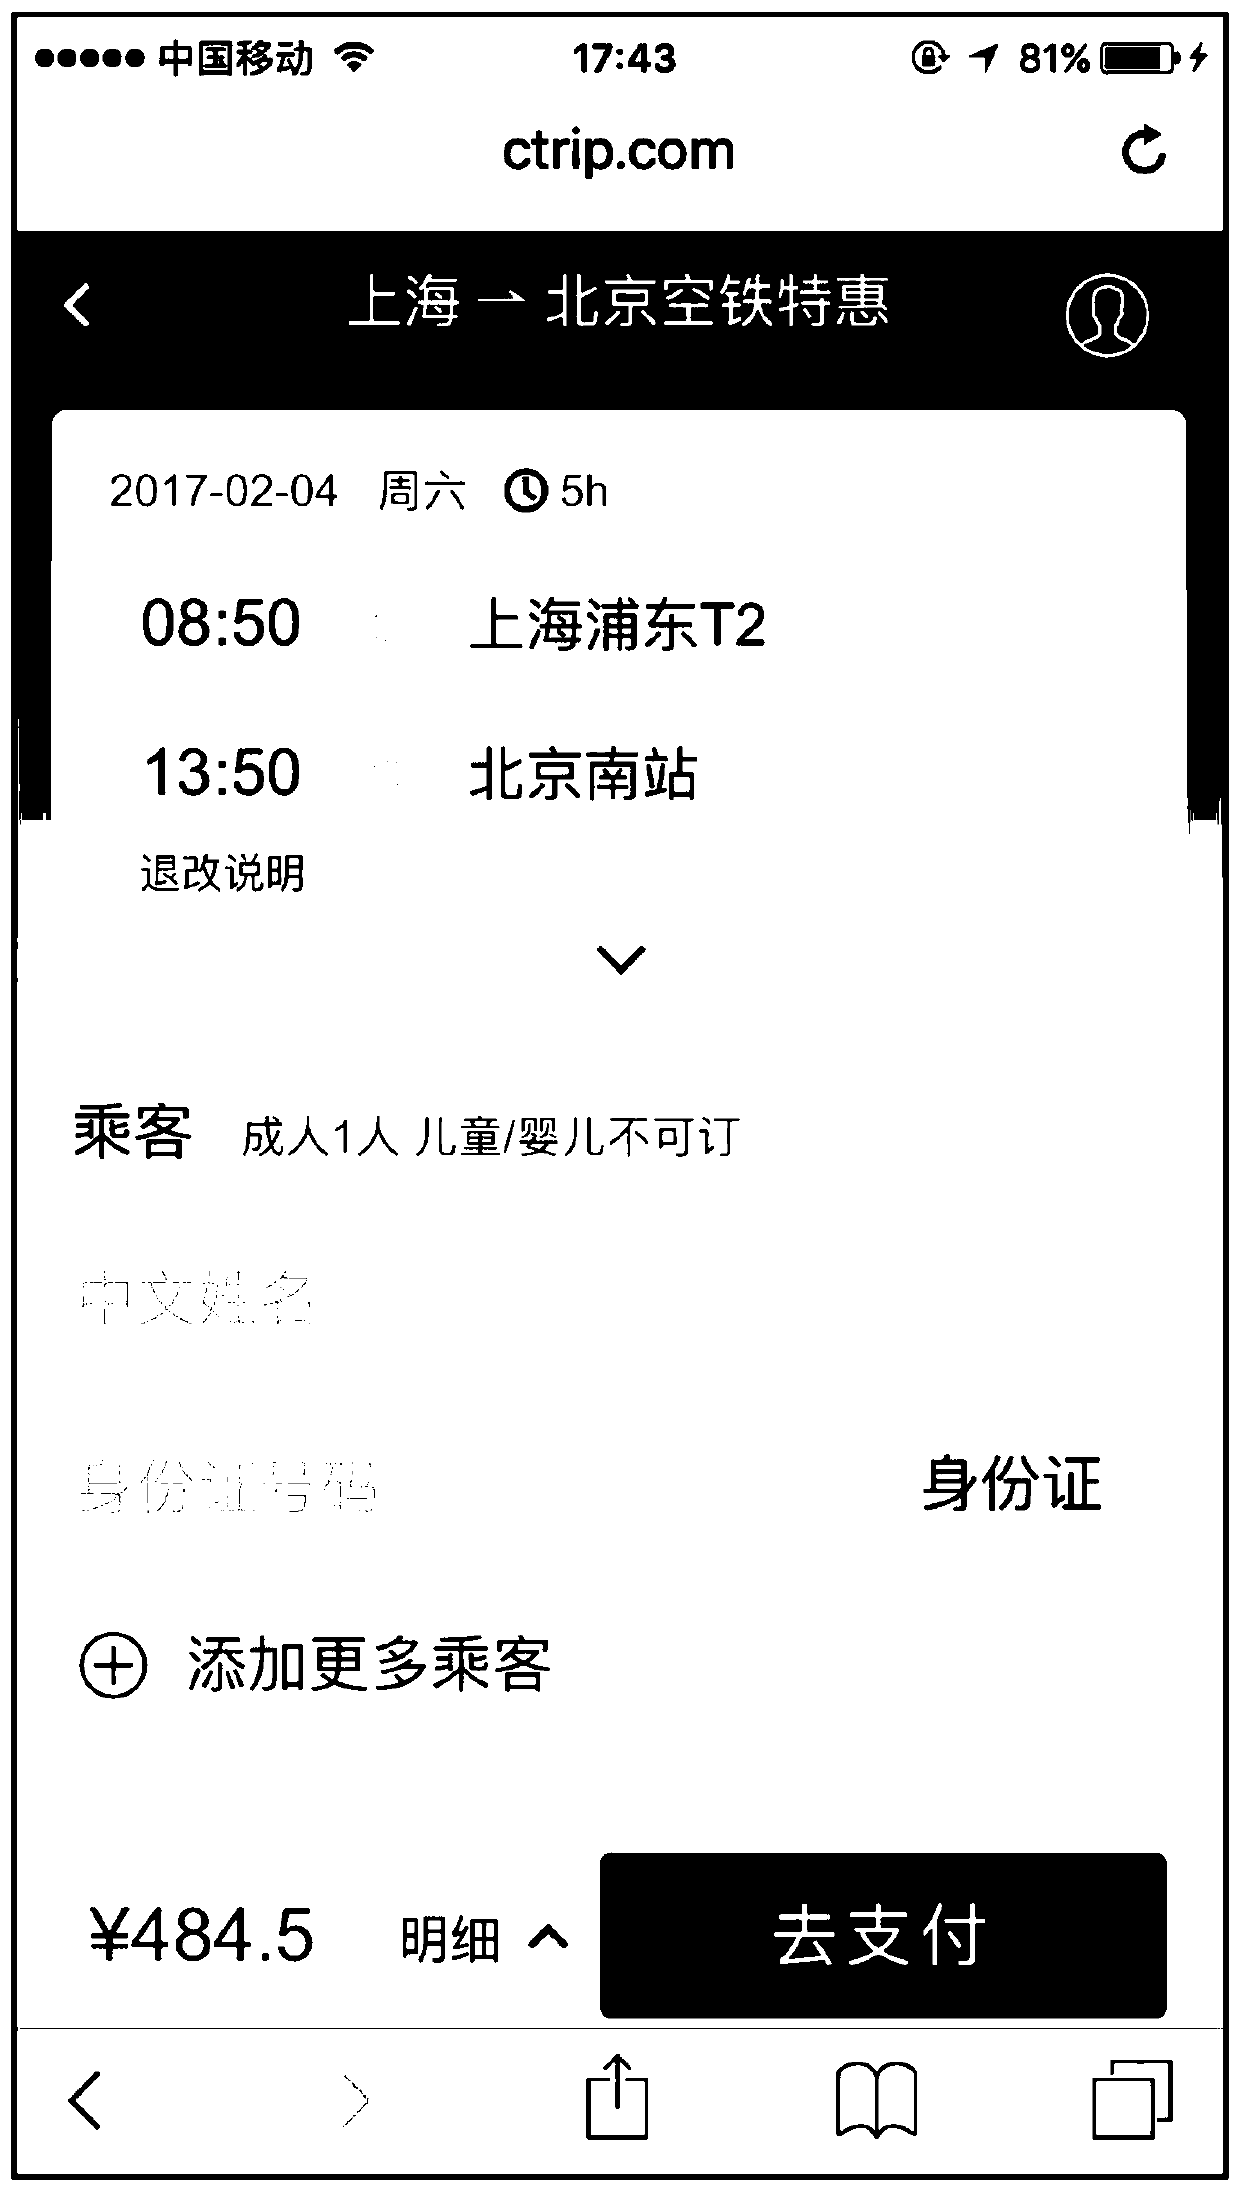 Method and system for displaying itinerary information on a page in an ota website